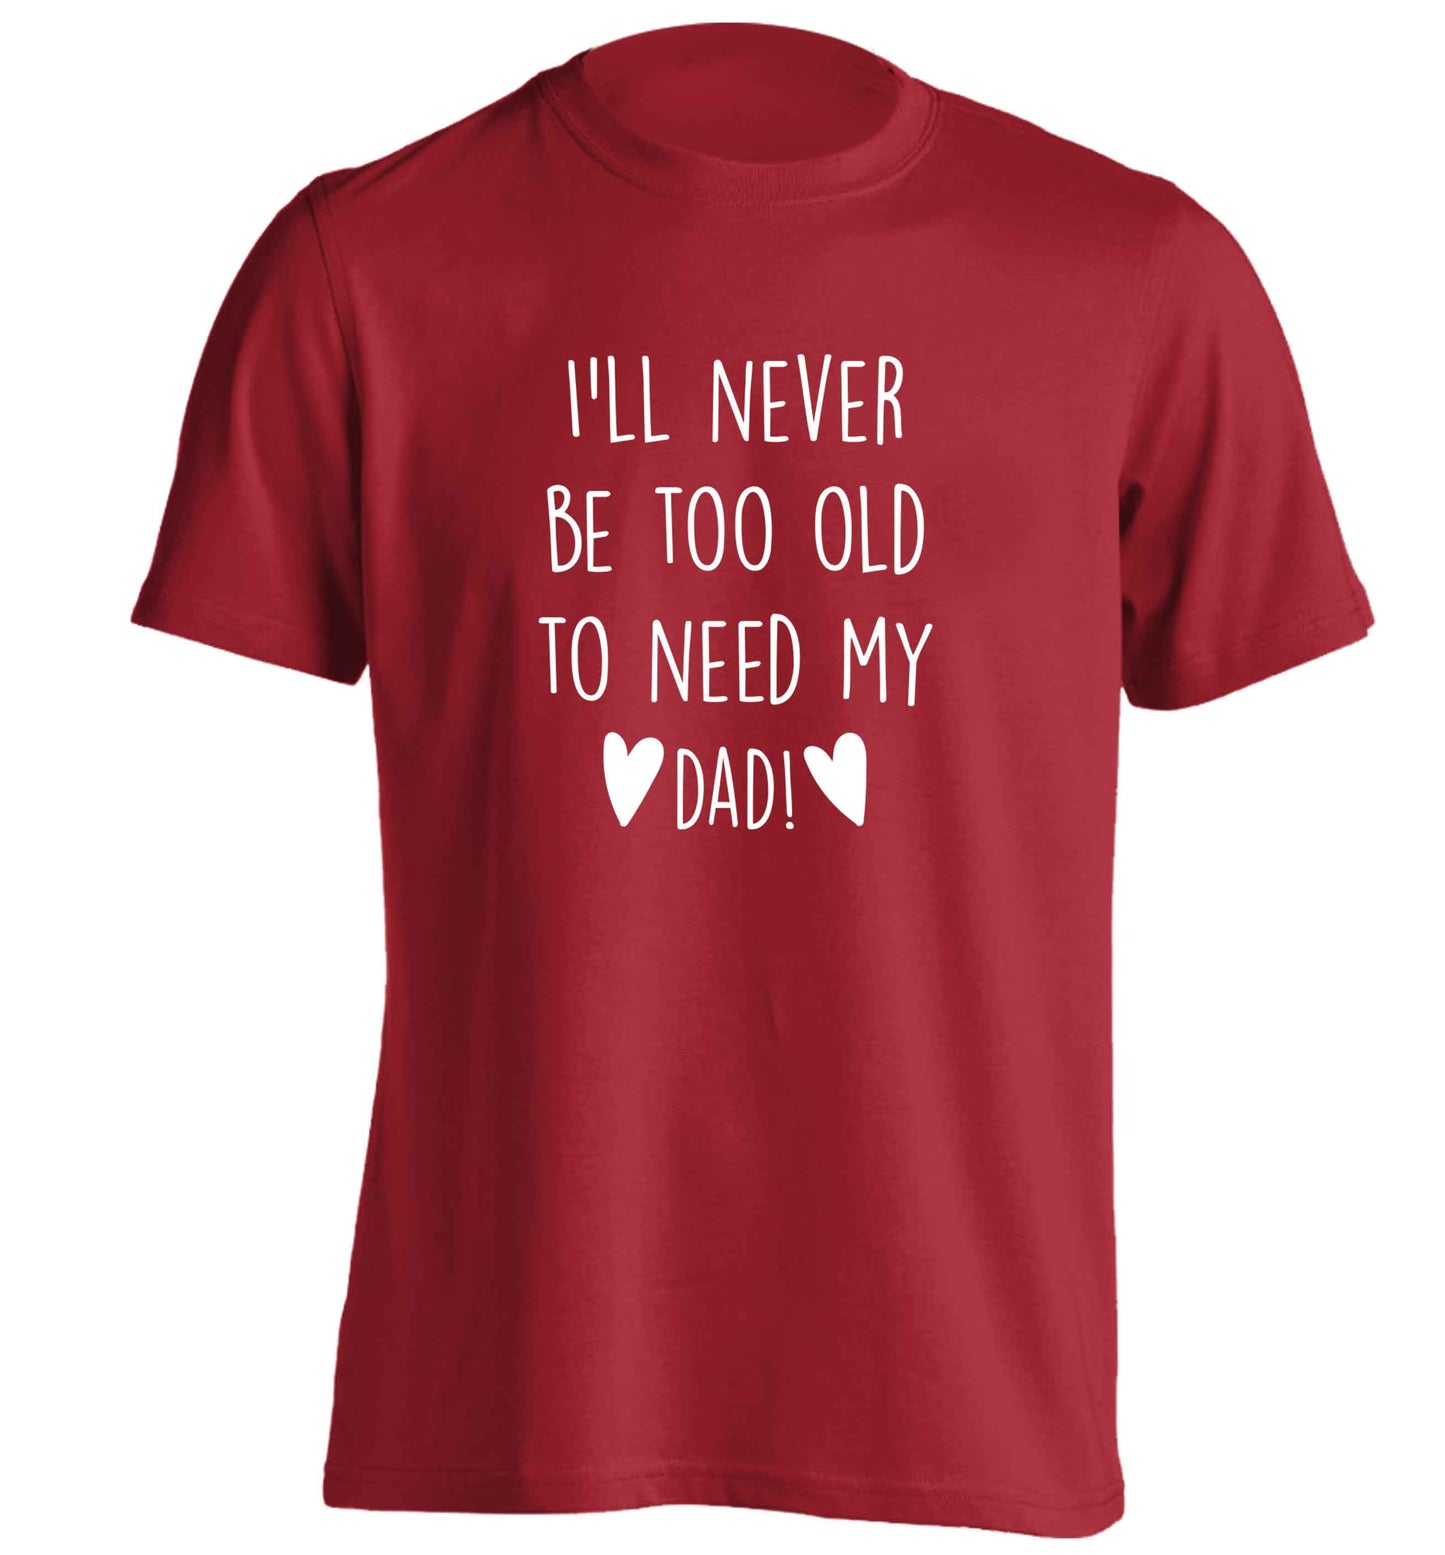 I'll never be too old to need my dad adults unisex red Tshirt 2XL